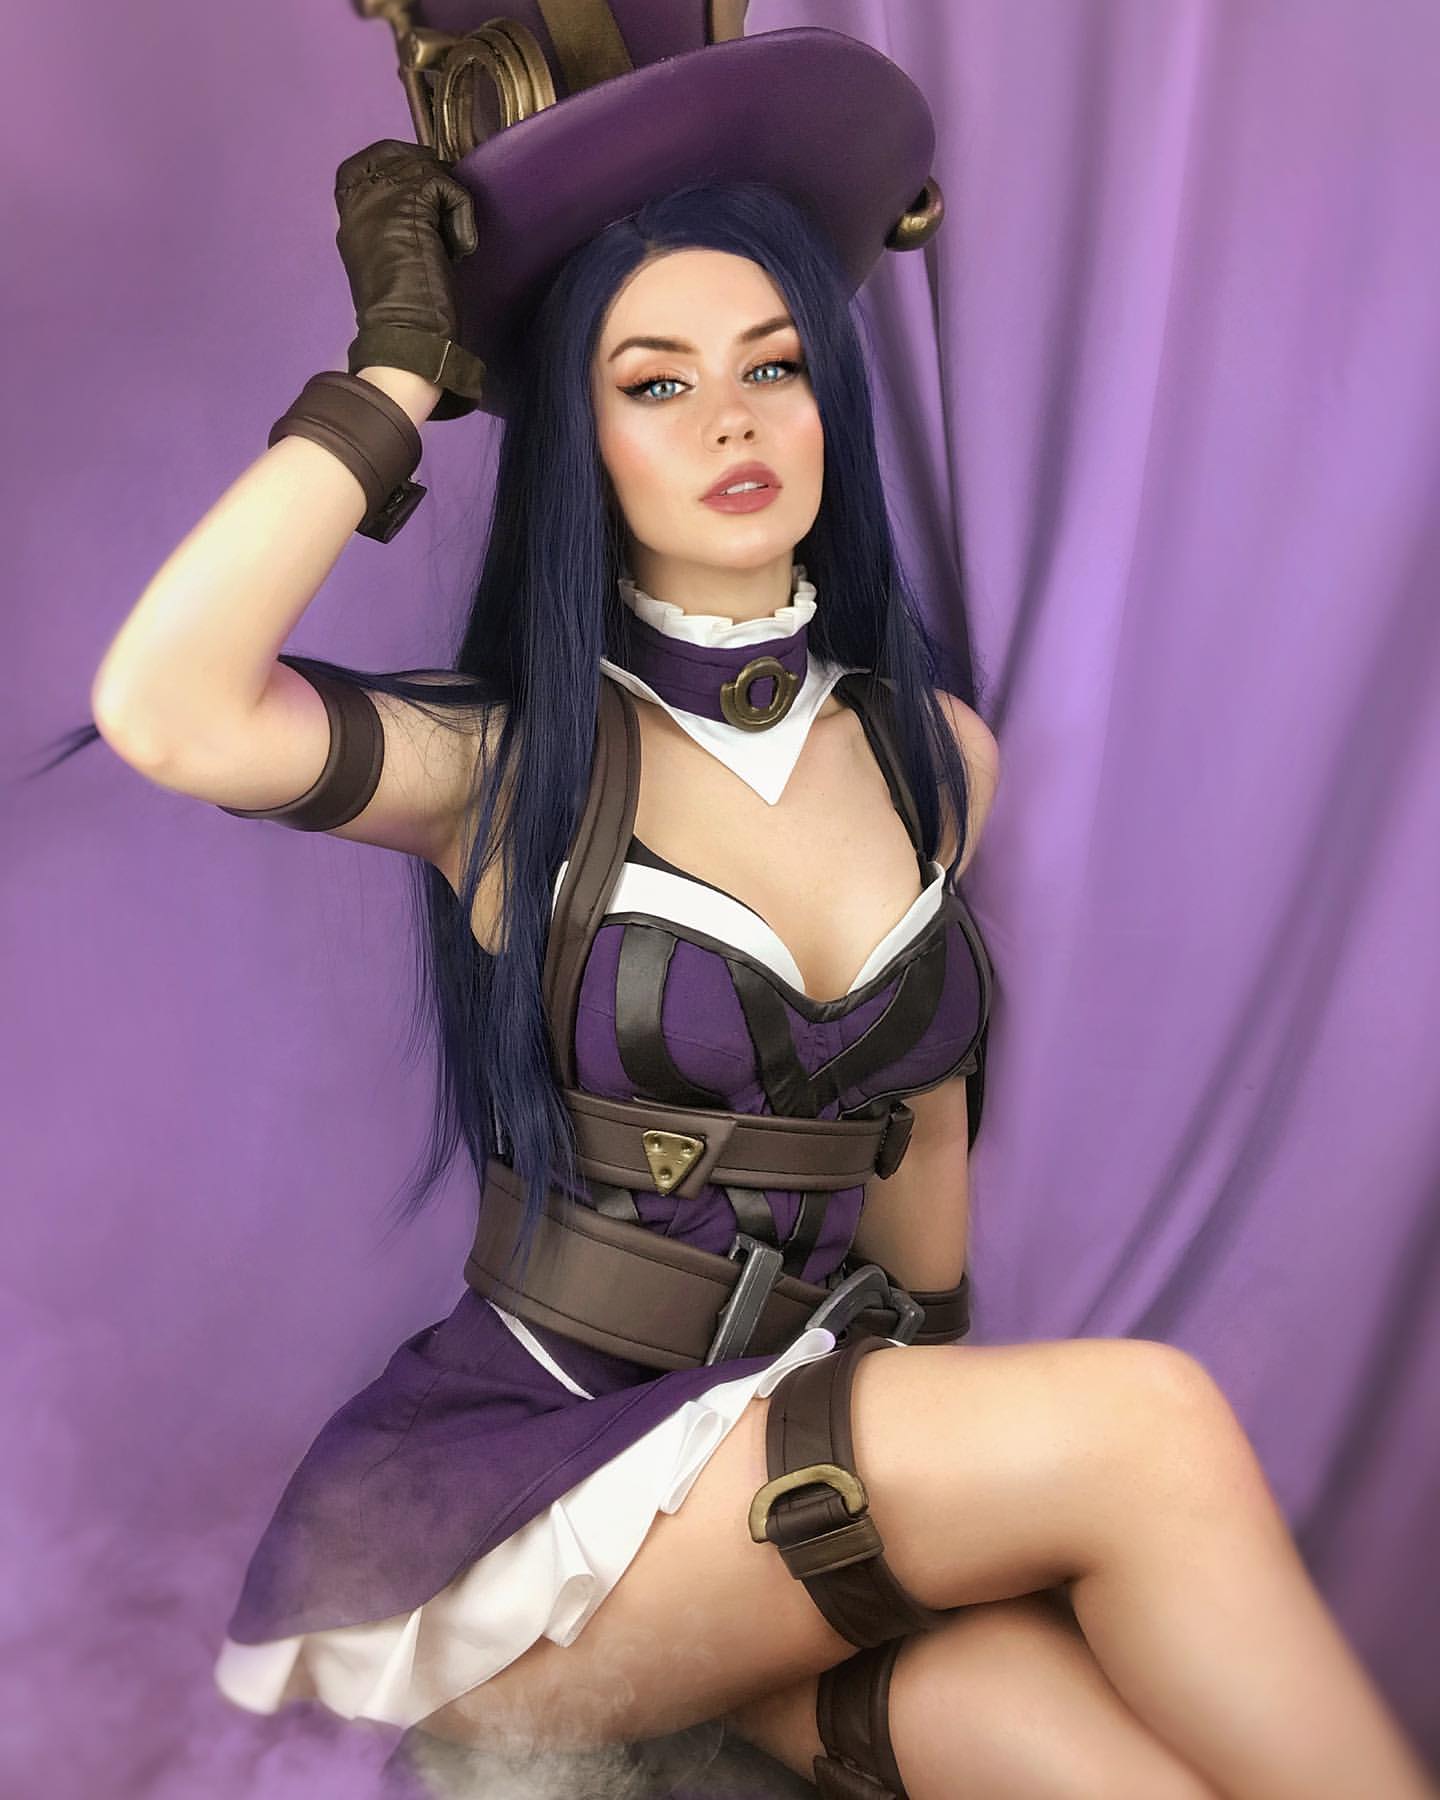 Angie Arrow's Caitlyn cosplay hit all the right targets, from her huge top hat to her purple dress.